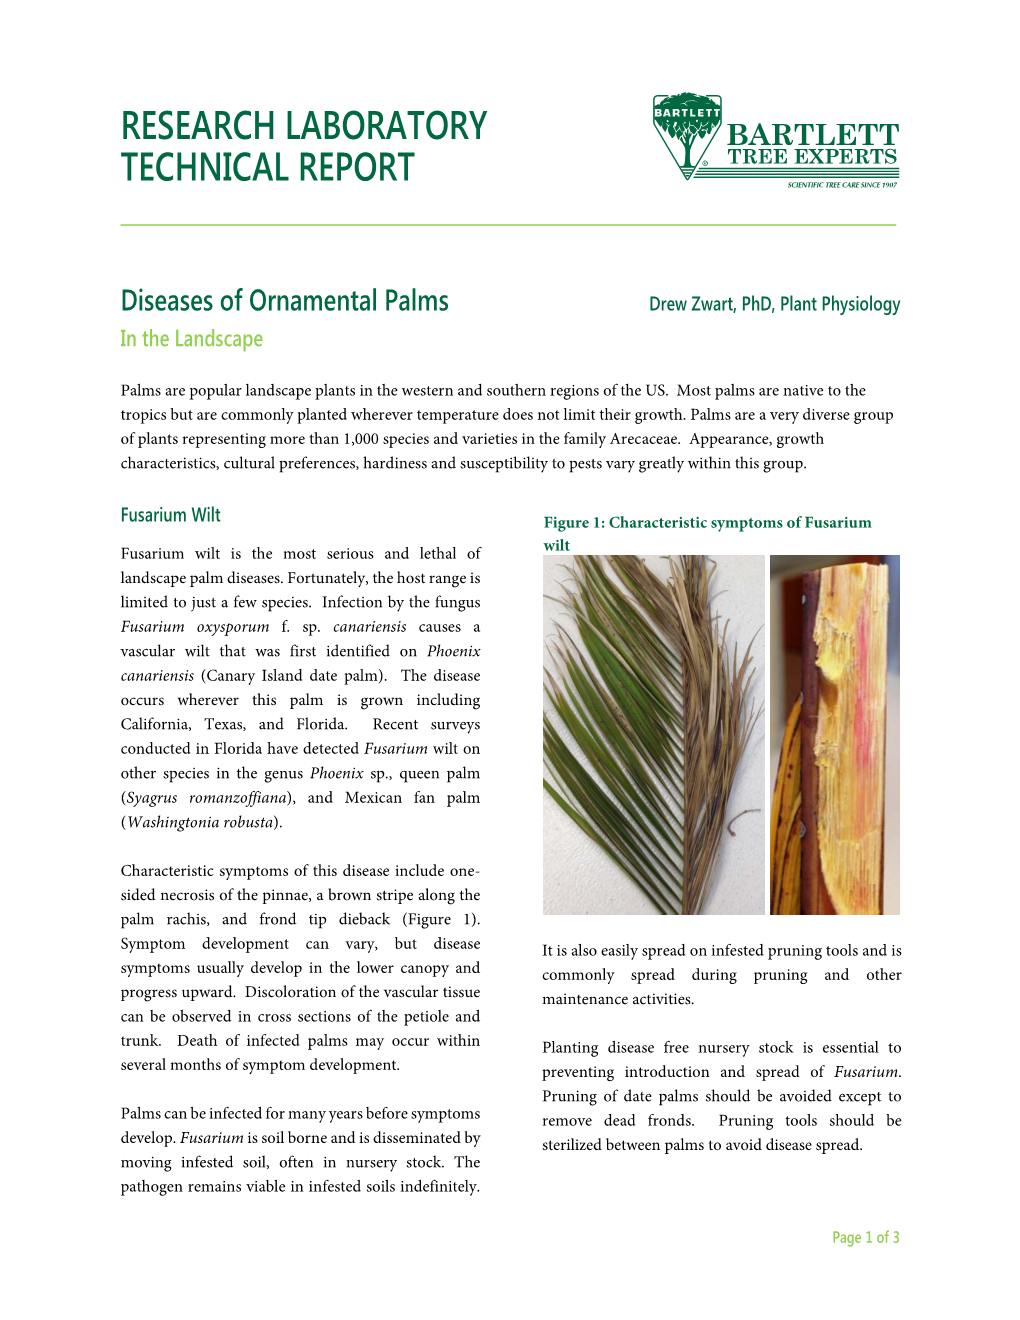 Diseases of Ornamental Palms Drew Zwart, Phd, Plant Physiology in the Landscape